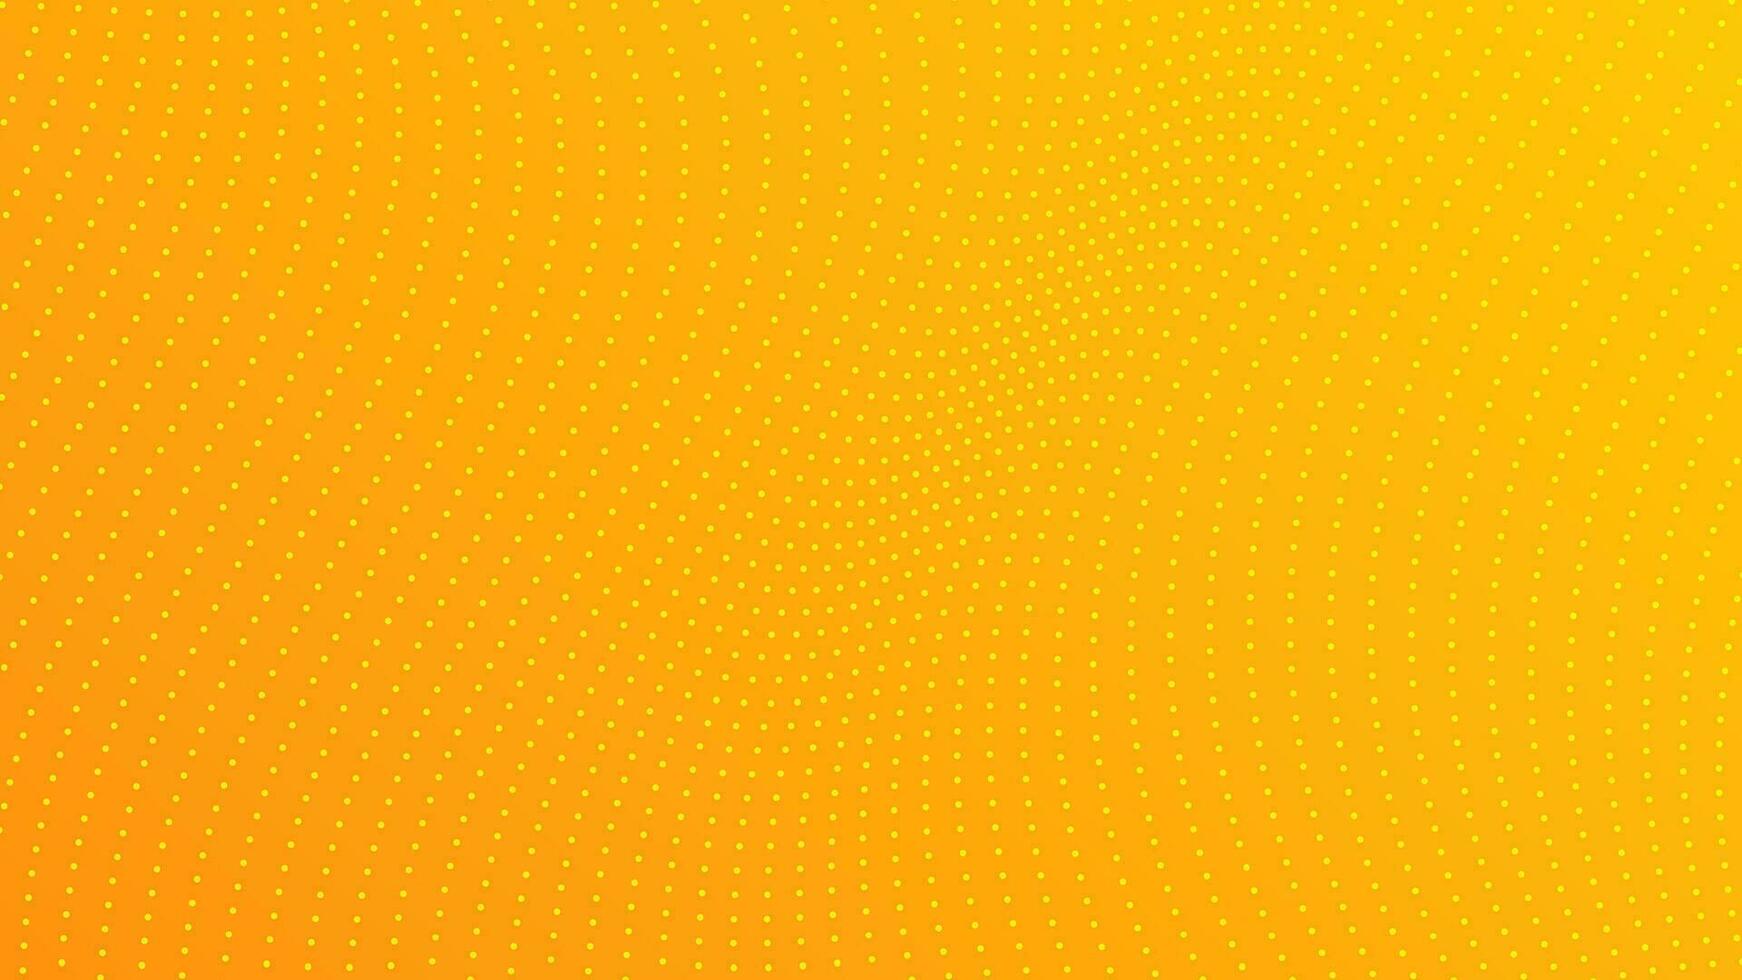 Halftone gradient background with dots vector